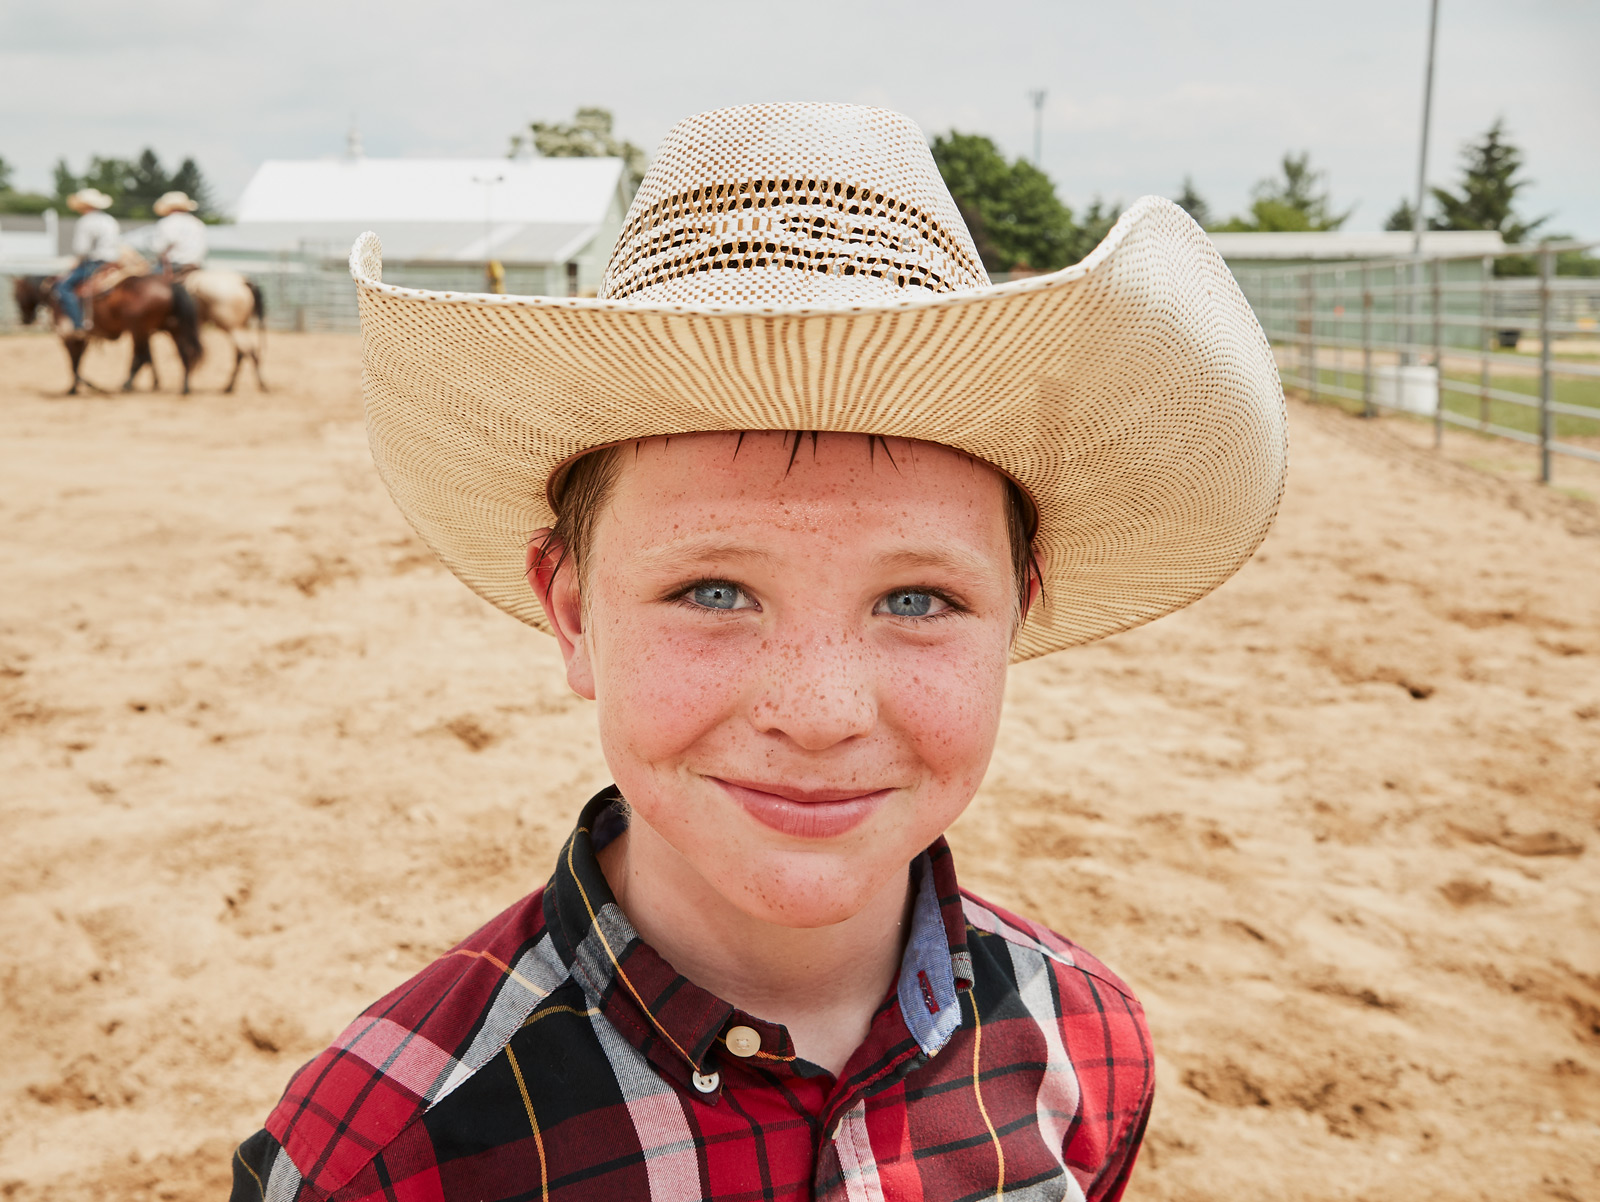 Red headed Boy at Youth Rodeo | Saverio Truglia